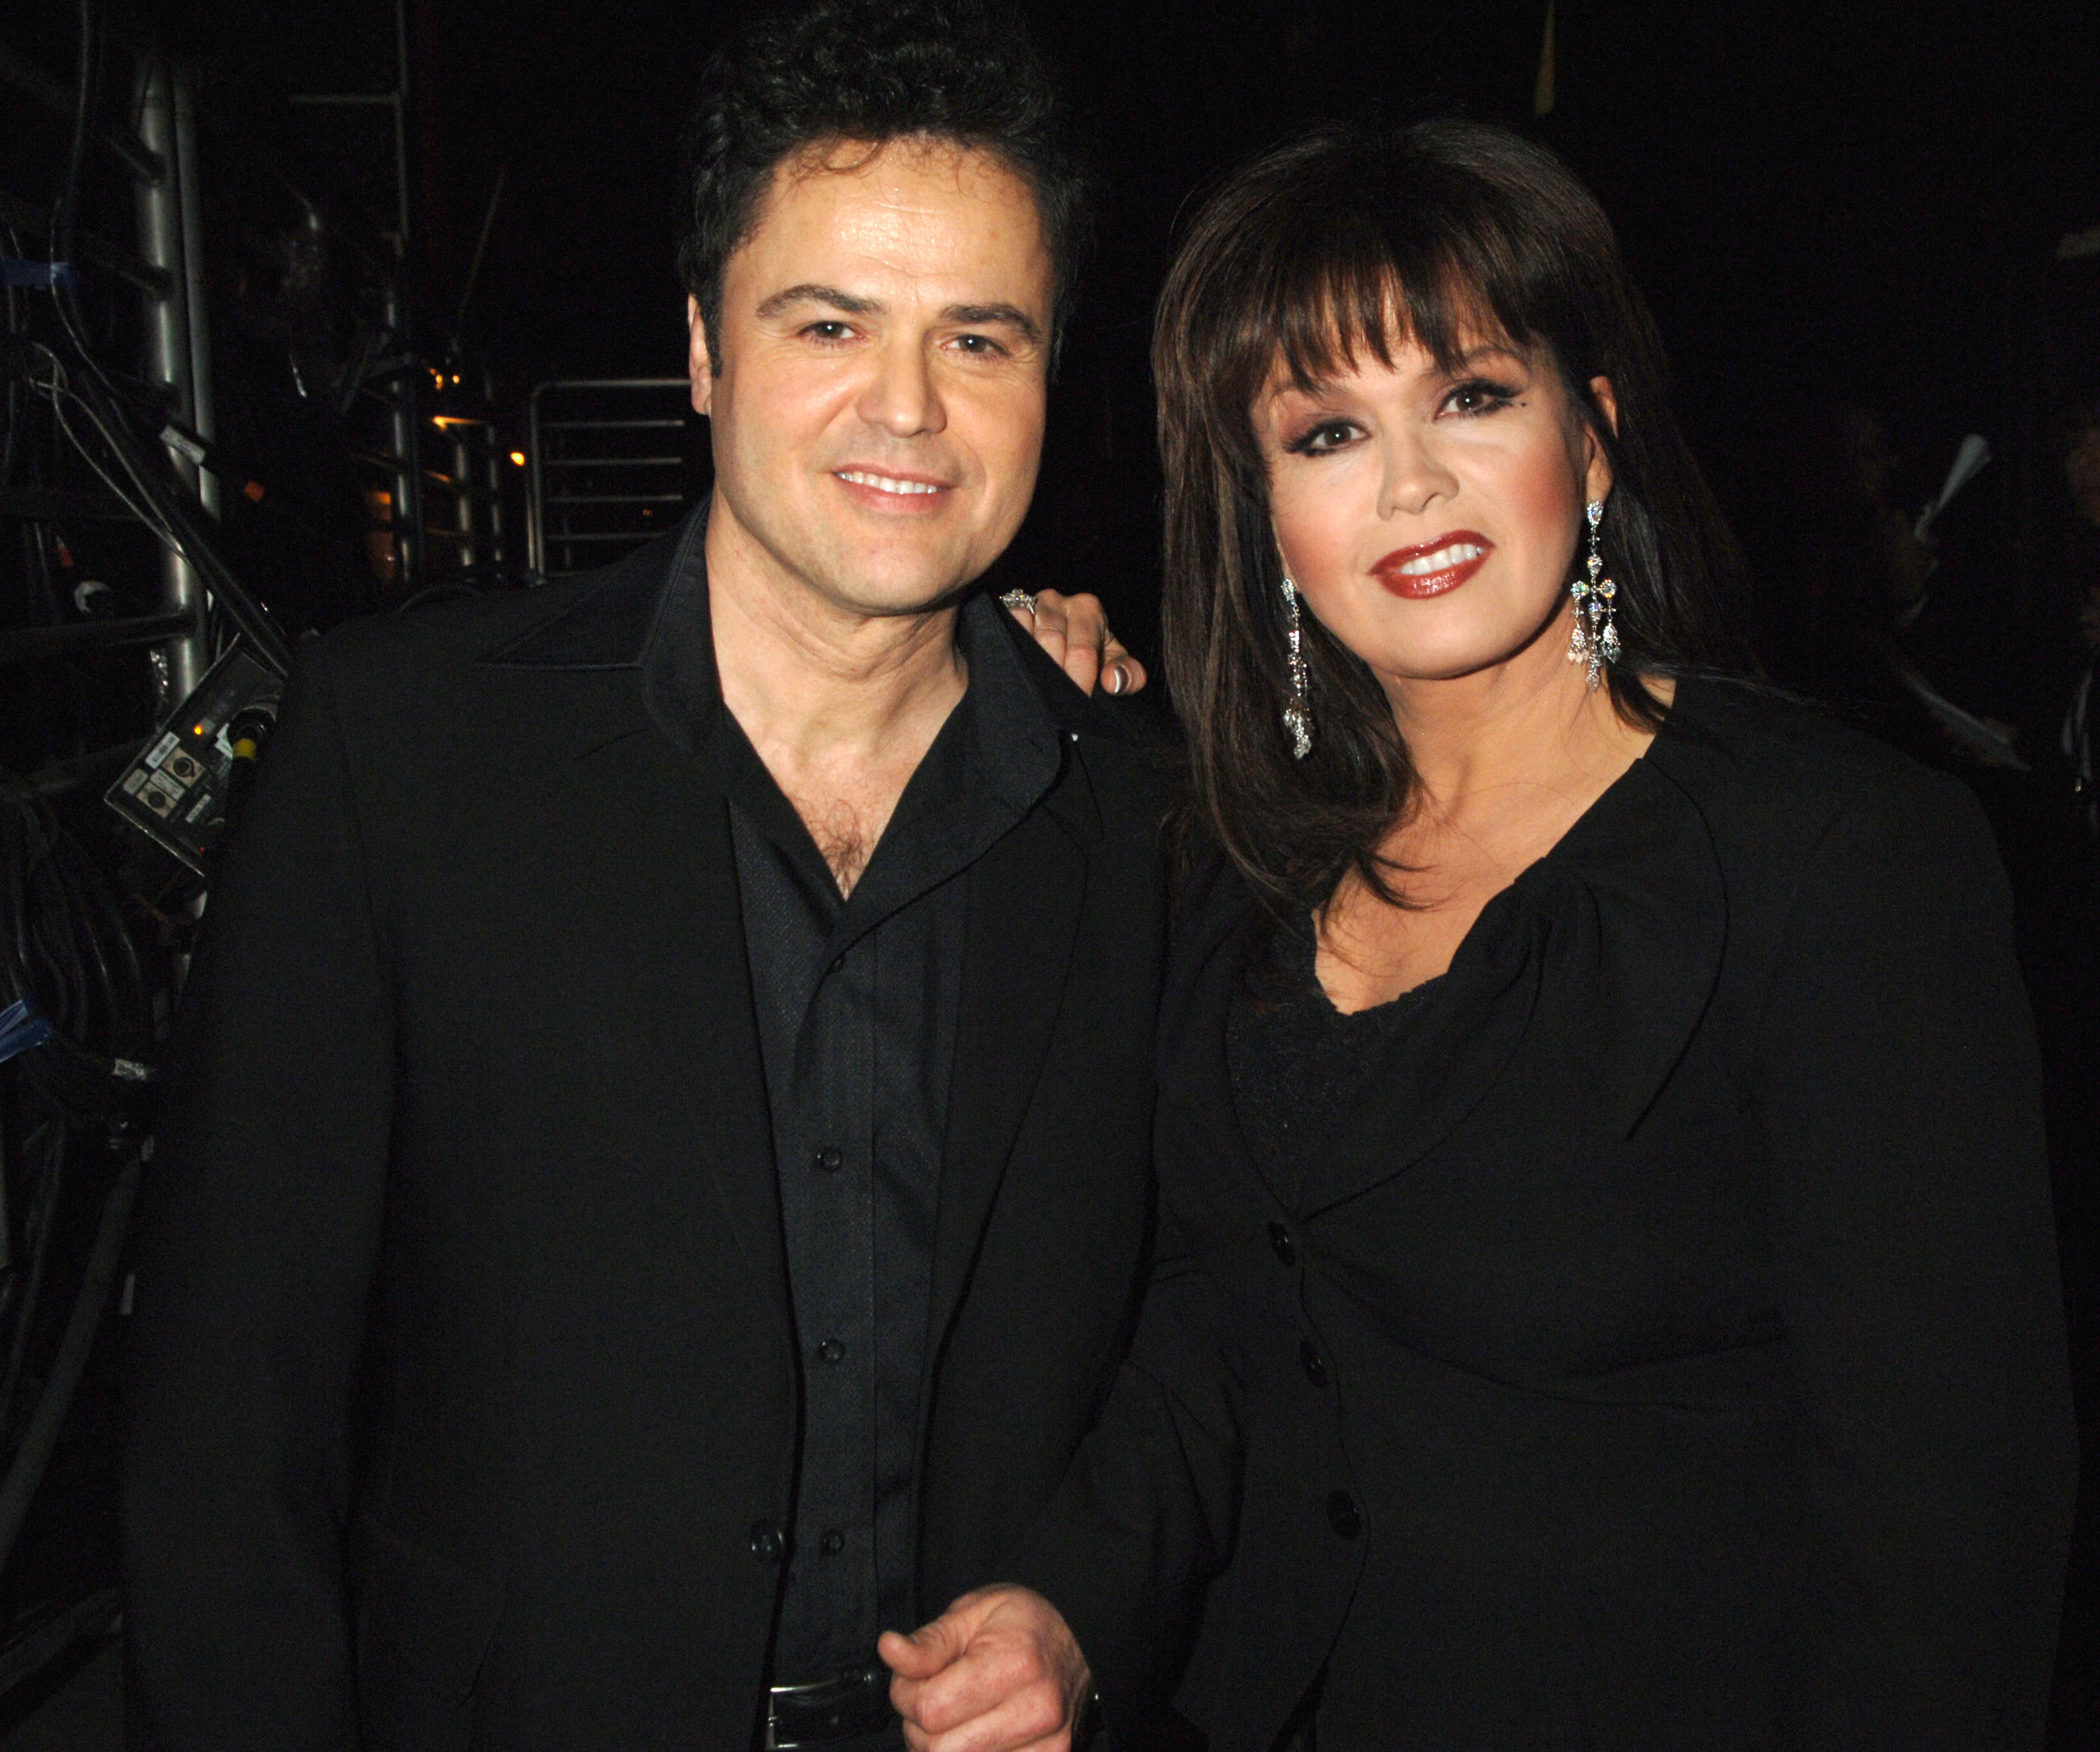 Donny Osmond and Marie Osmond during the TV Land Awards in Santa Monica, California on March 19, 2006. | Source: Getty Images